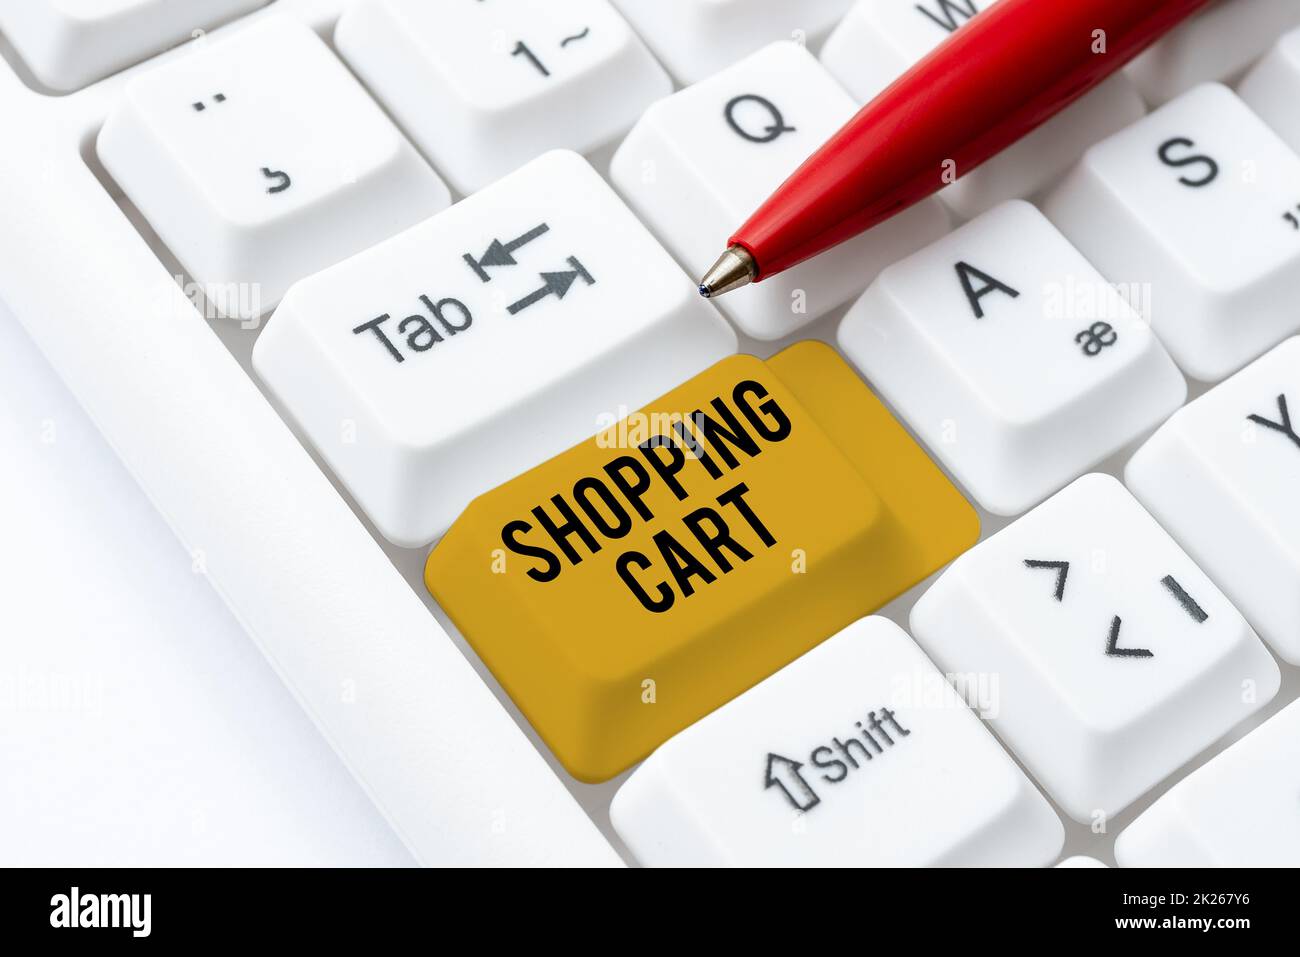 Writing displaying text Shopping Cart. Business overview Case Trolley Carrying Groceries and Merchandise Typing Game Program Codes, Programming New Playable Application Stock Photo